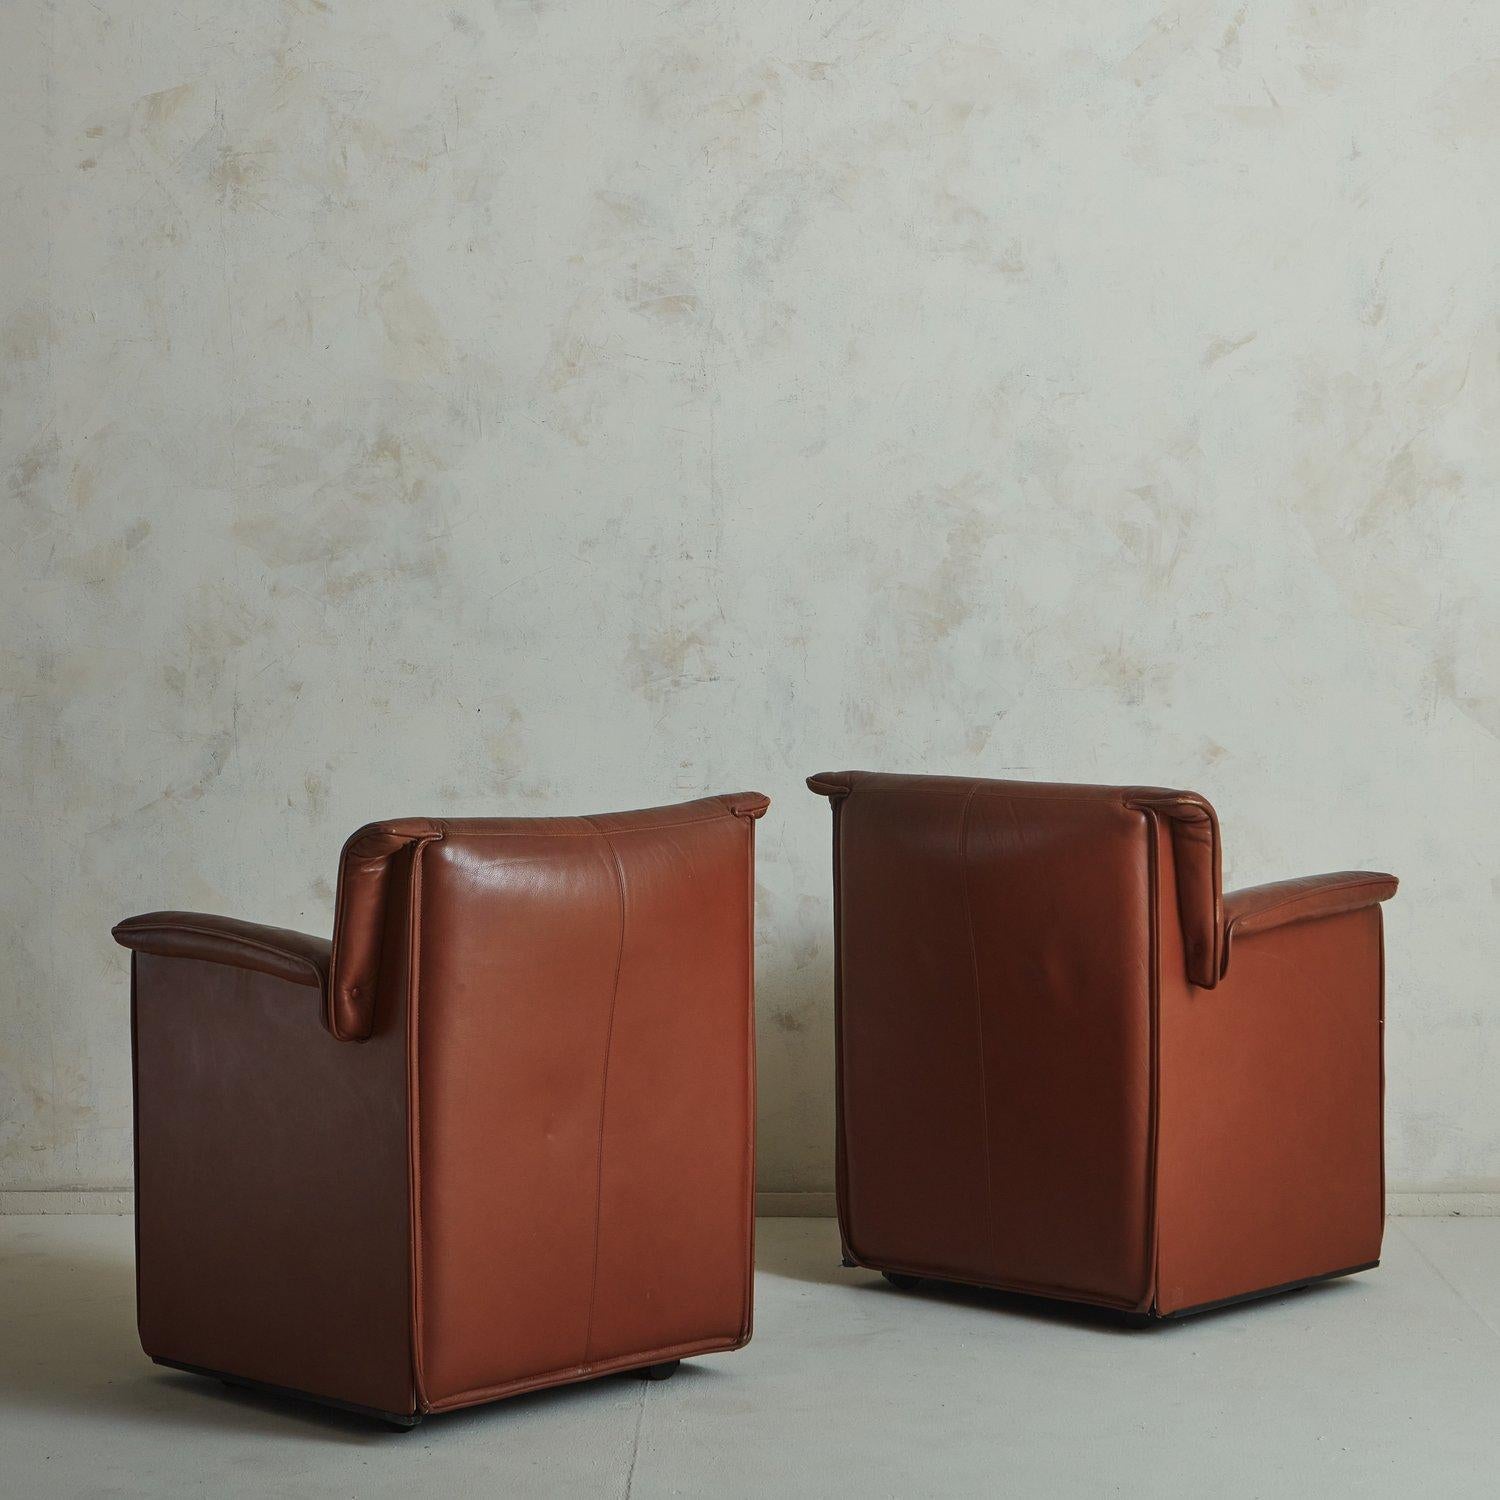 Italian 'Lauriana' Chair in Cognac Leather By Afra + Tobia Scarpa For B&B Italia 